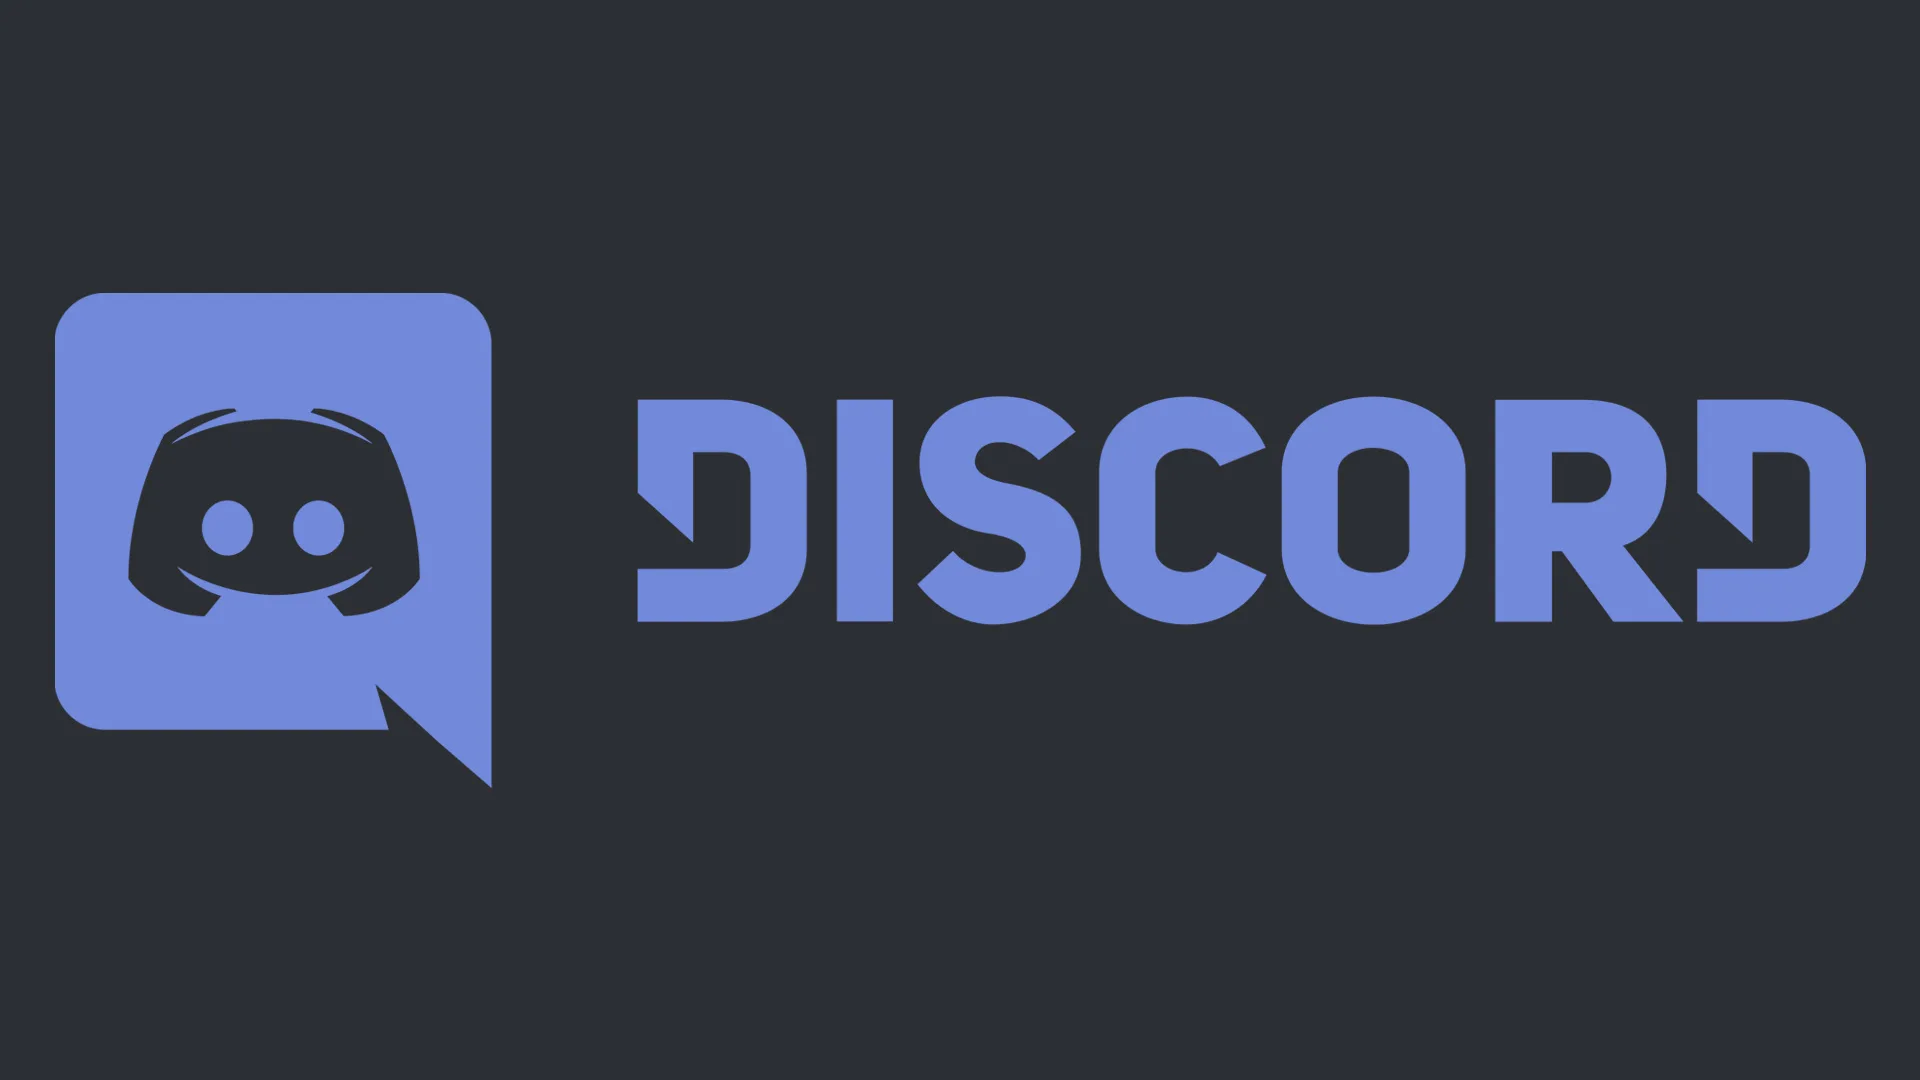 Bringing developers, translators, and users together with Discord